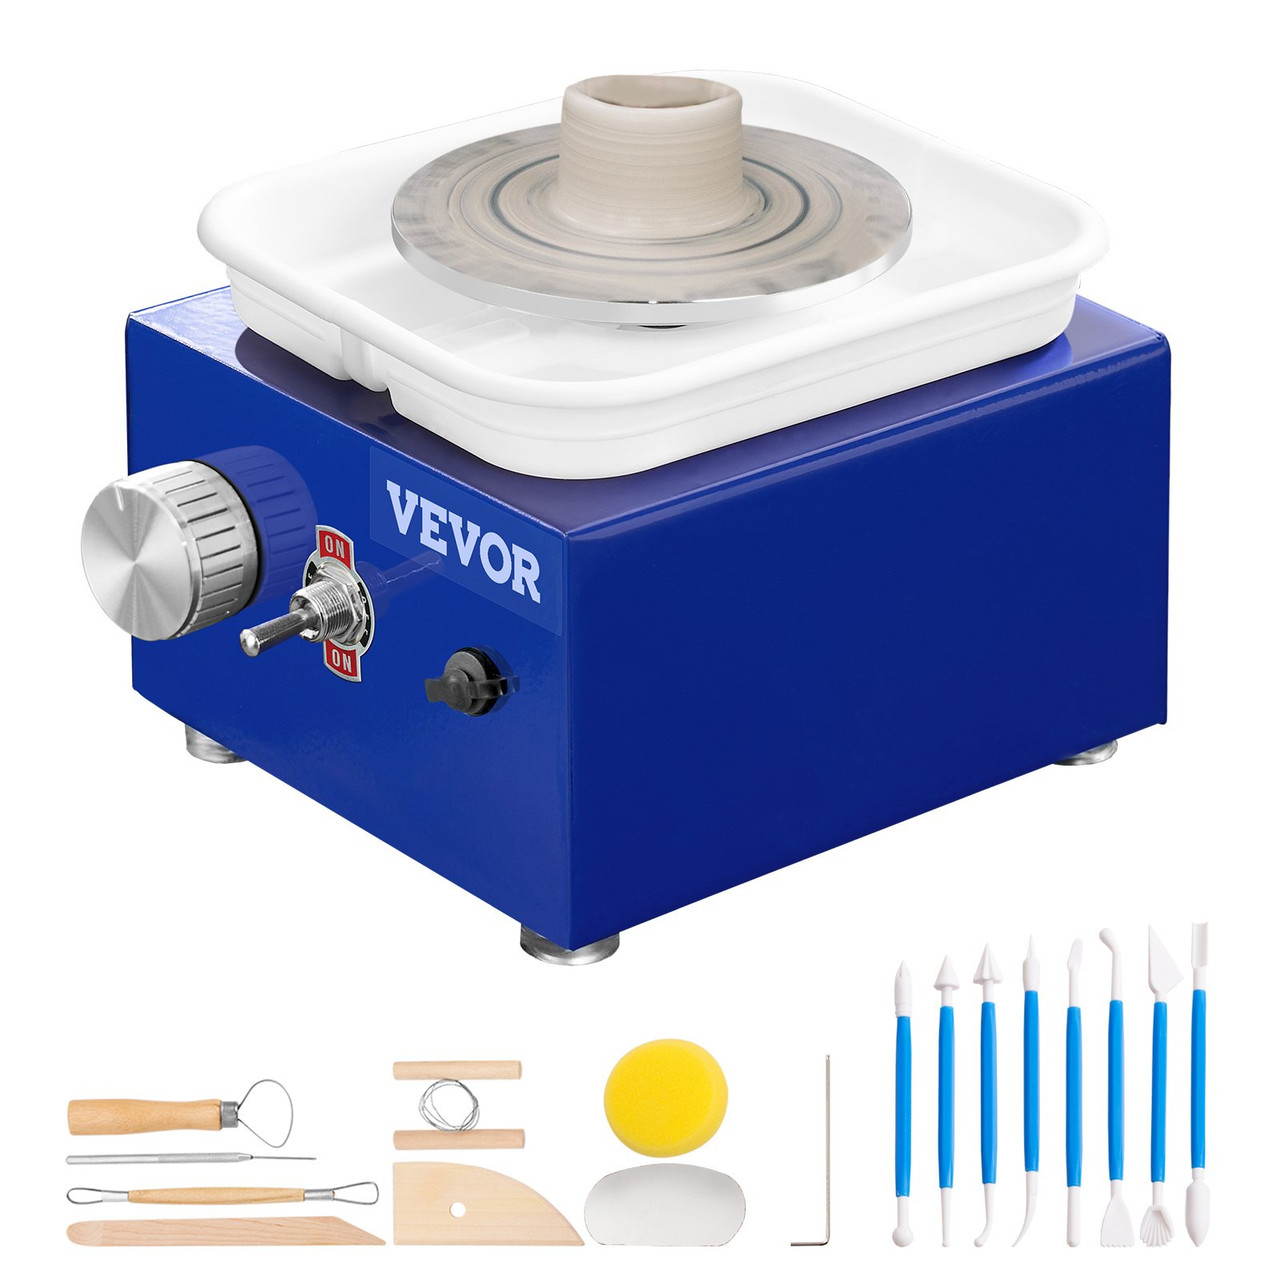 Mini Pottery Wheel, 2 Turntables 2.6in / 3.9in Ceramic Wheel Forming Machine, Adjustable 0-300RPM Speed ABS Detachable Basin, Sculpting Tools Apron